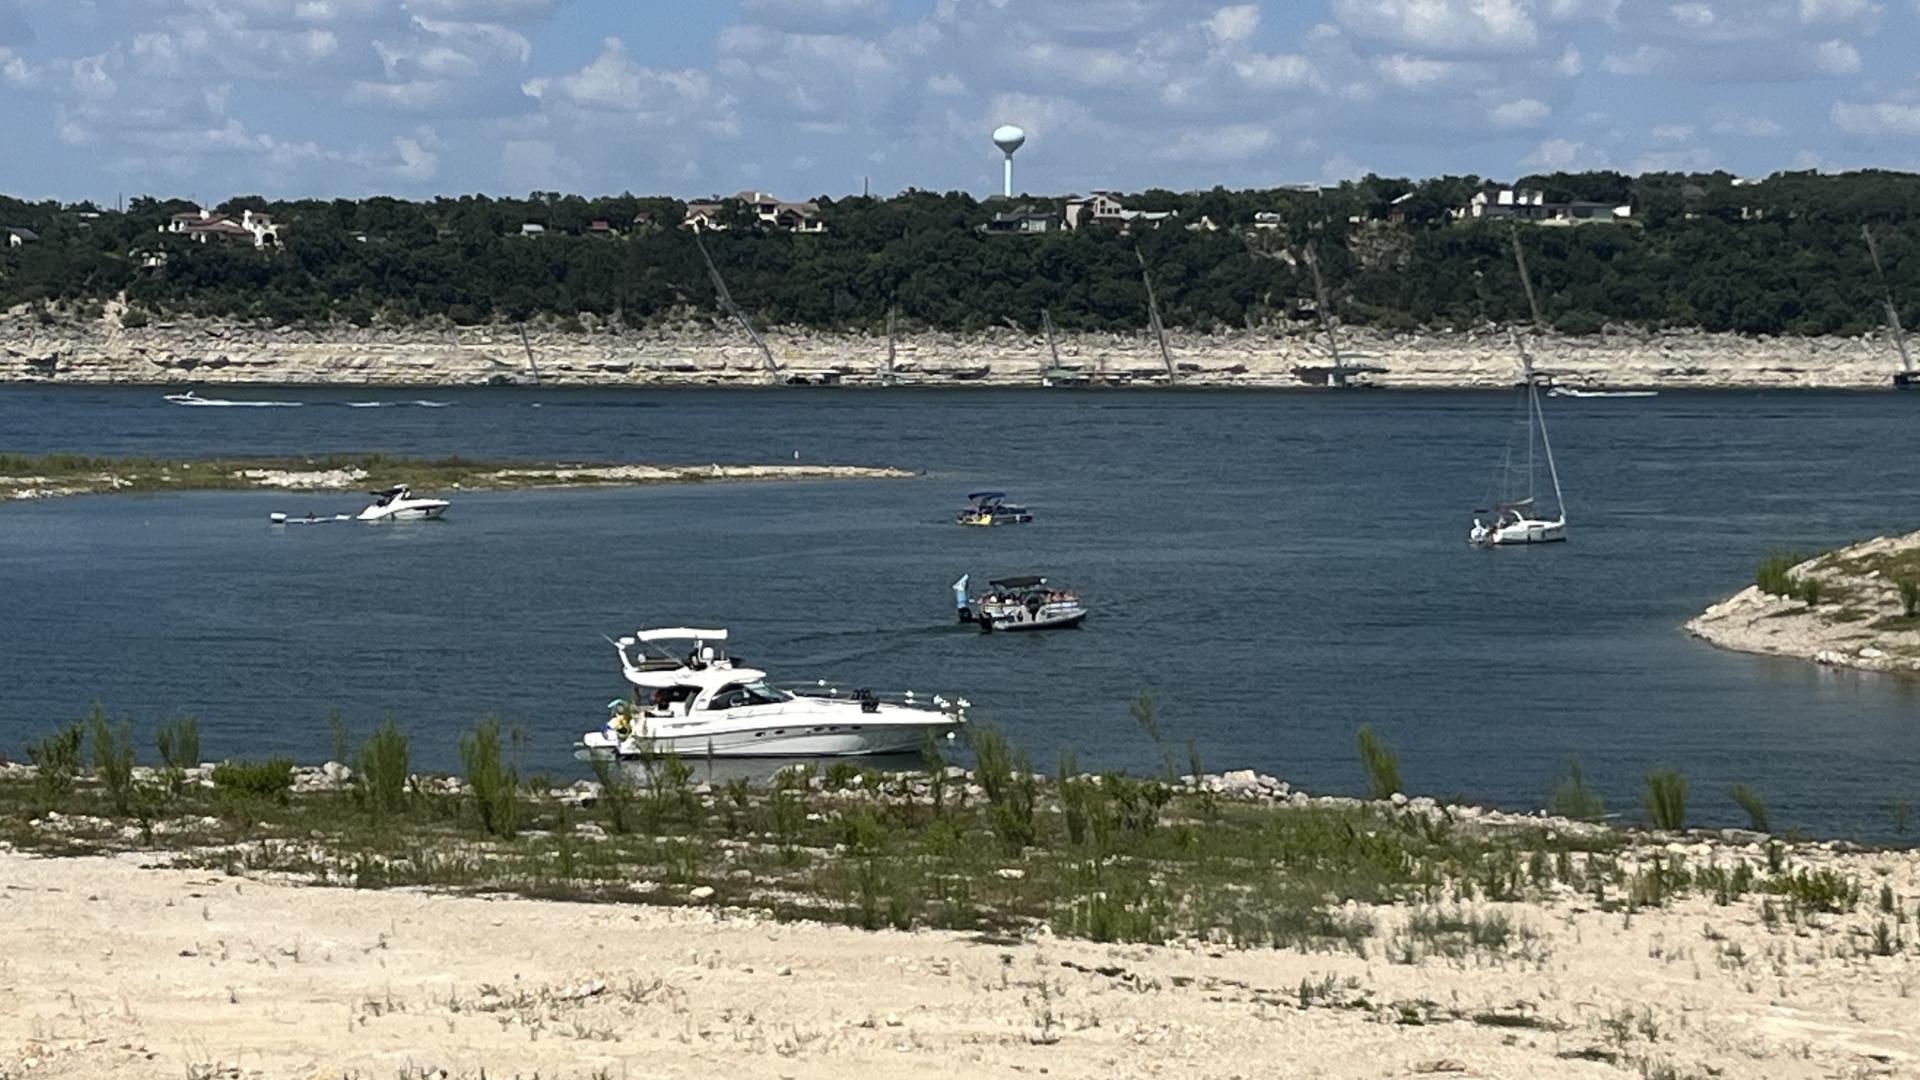 Austin-Travis County EMS reported that an adult failed to resurface after going underwater at Arkansas Bend Park.